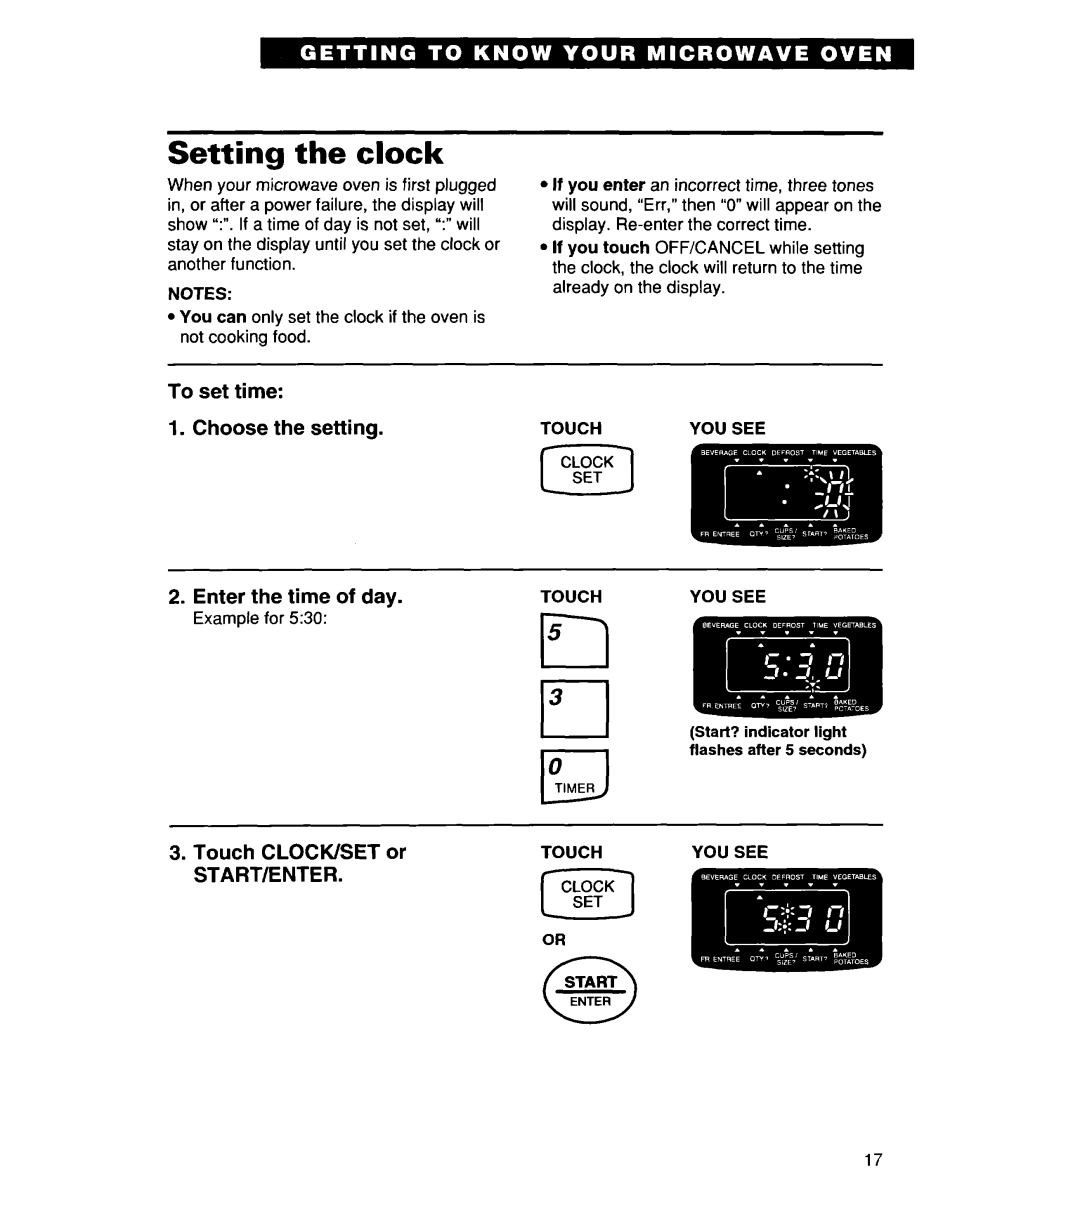 Whirlpool MT8118XE 5 n r3-l, To set time 1. Choose the setting, Enter the time of day, Touch CLOCK/SET or START/ENTER 